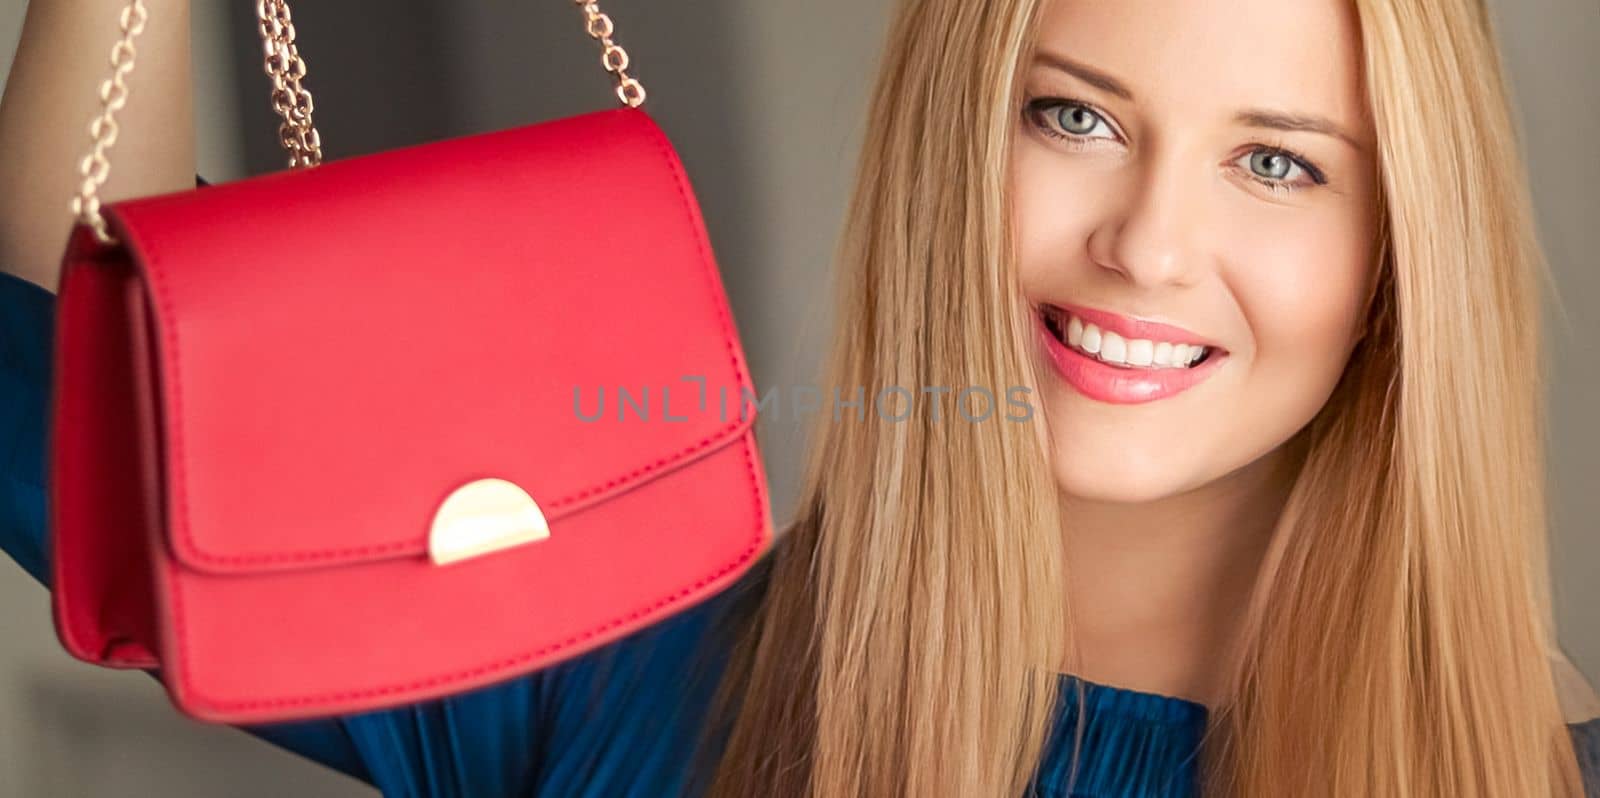 Fashion and accessories, happy beautiful woman holding small red handbag with golden details as stylish accessory and luxury shopping by Anneleven